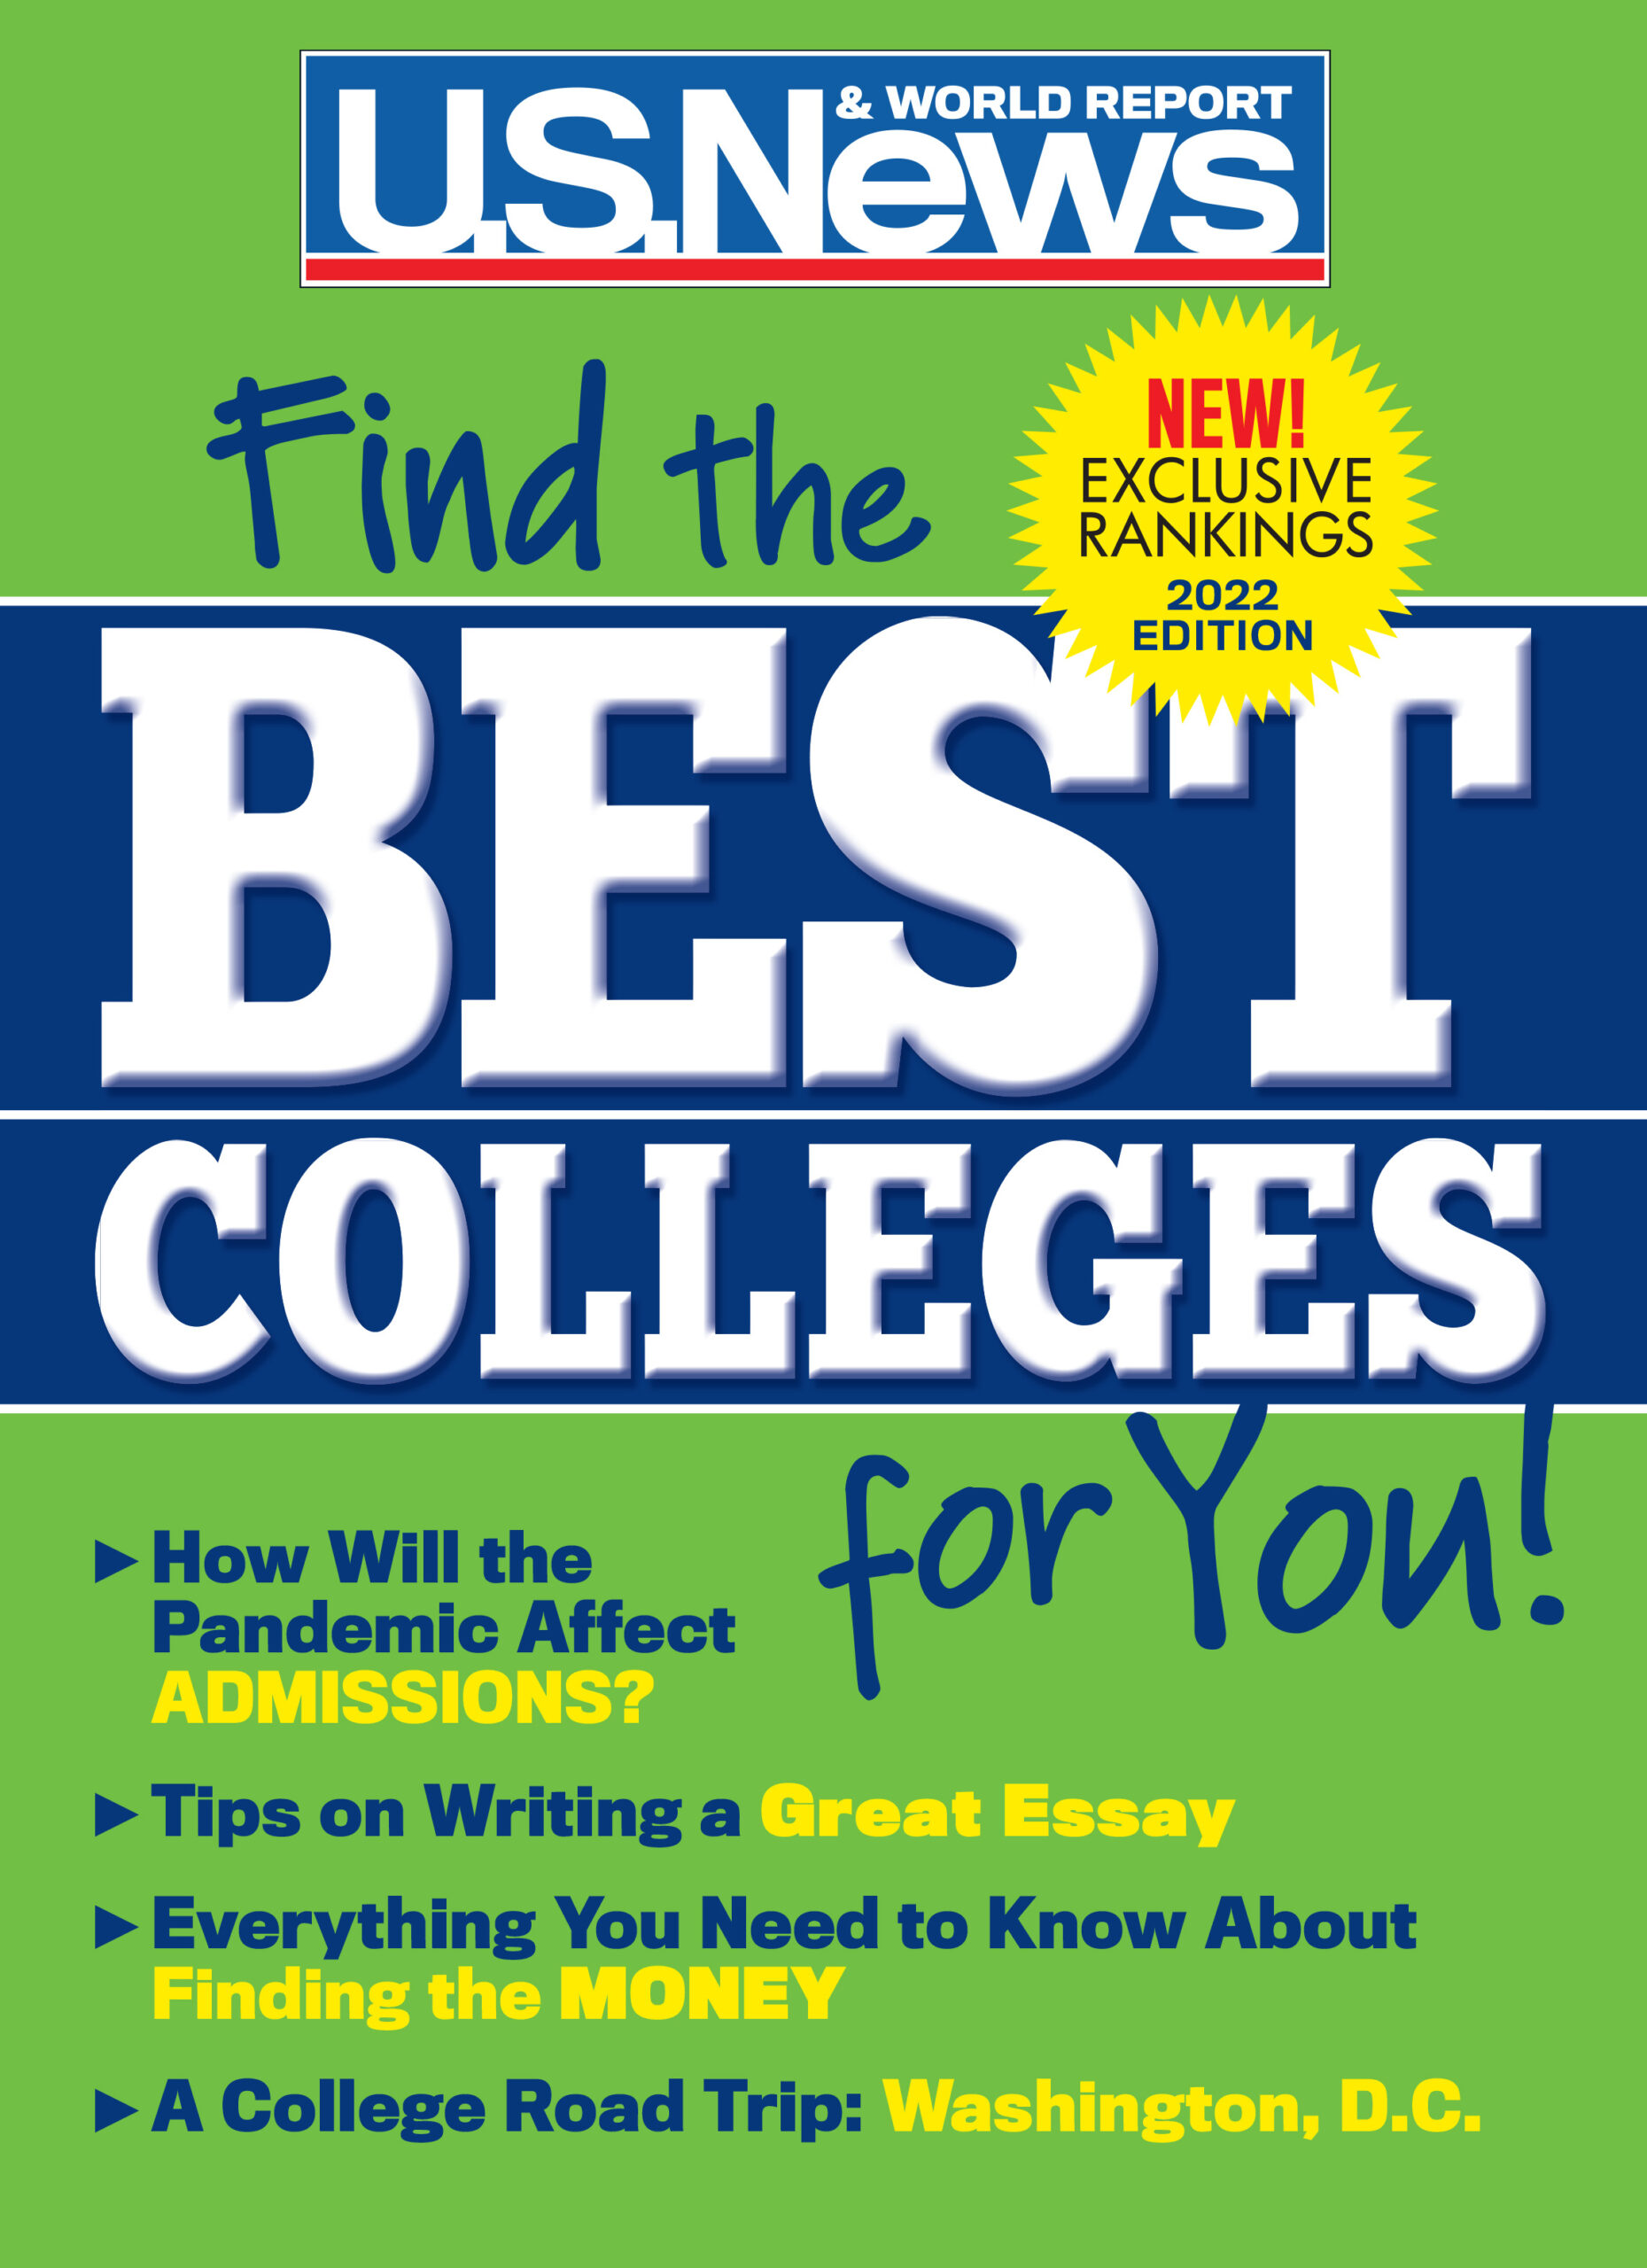 Cover of the 2022 edition of U.S. News & World Report’s Best Colleges rankings.